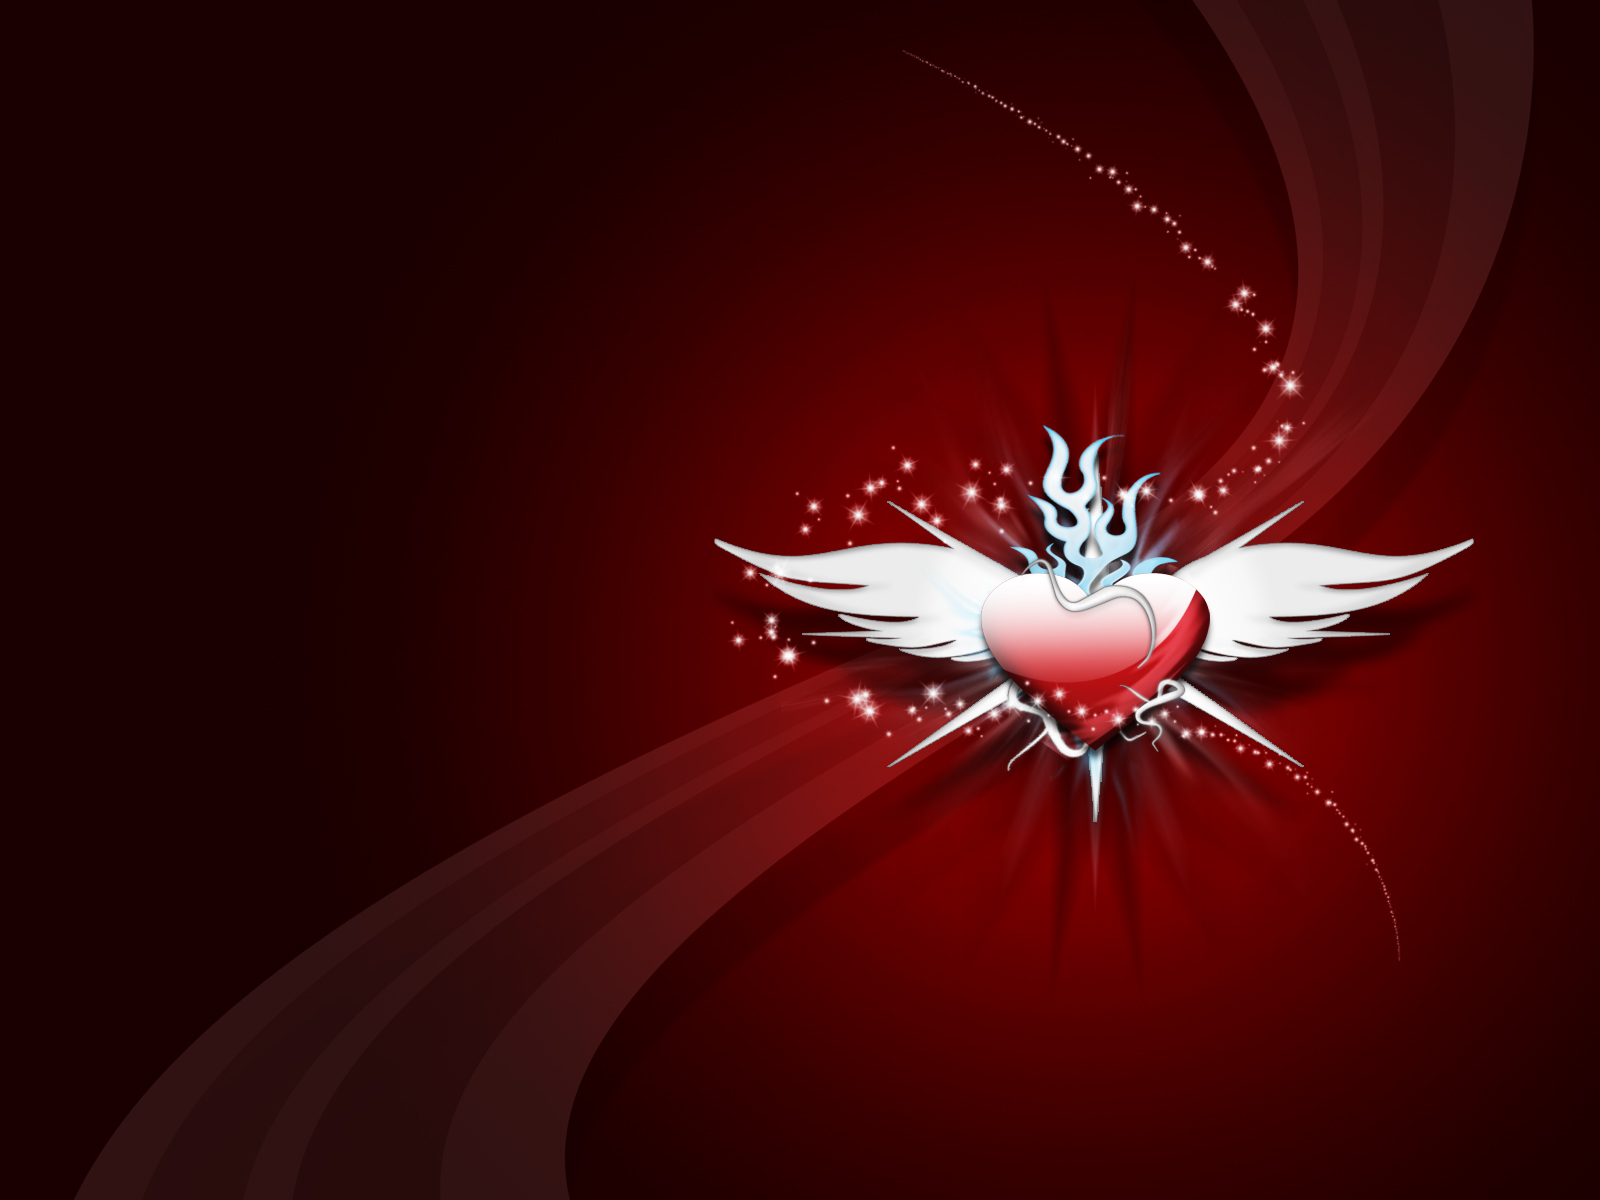 Heart With Wings Desktop Pc And Mac Wallpaper